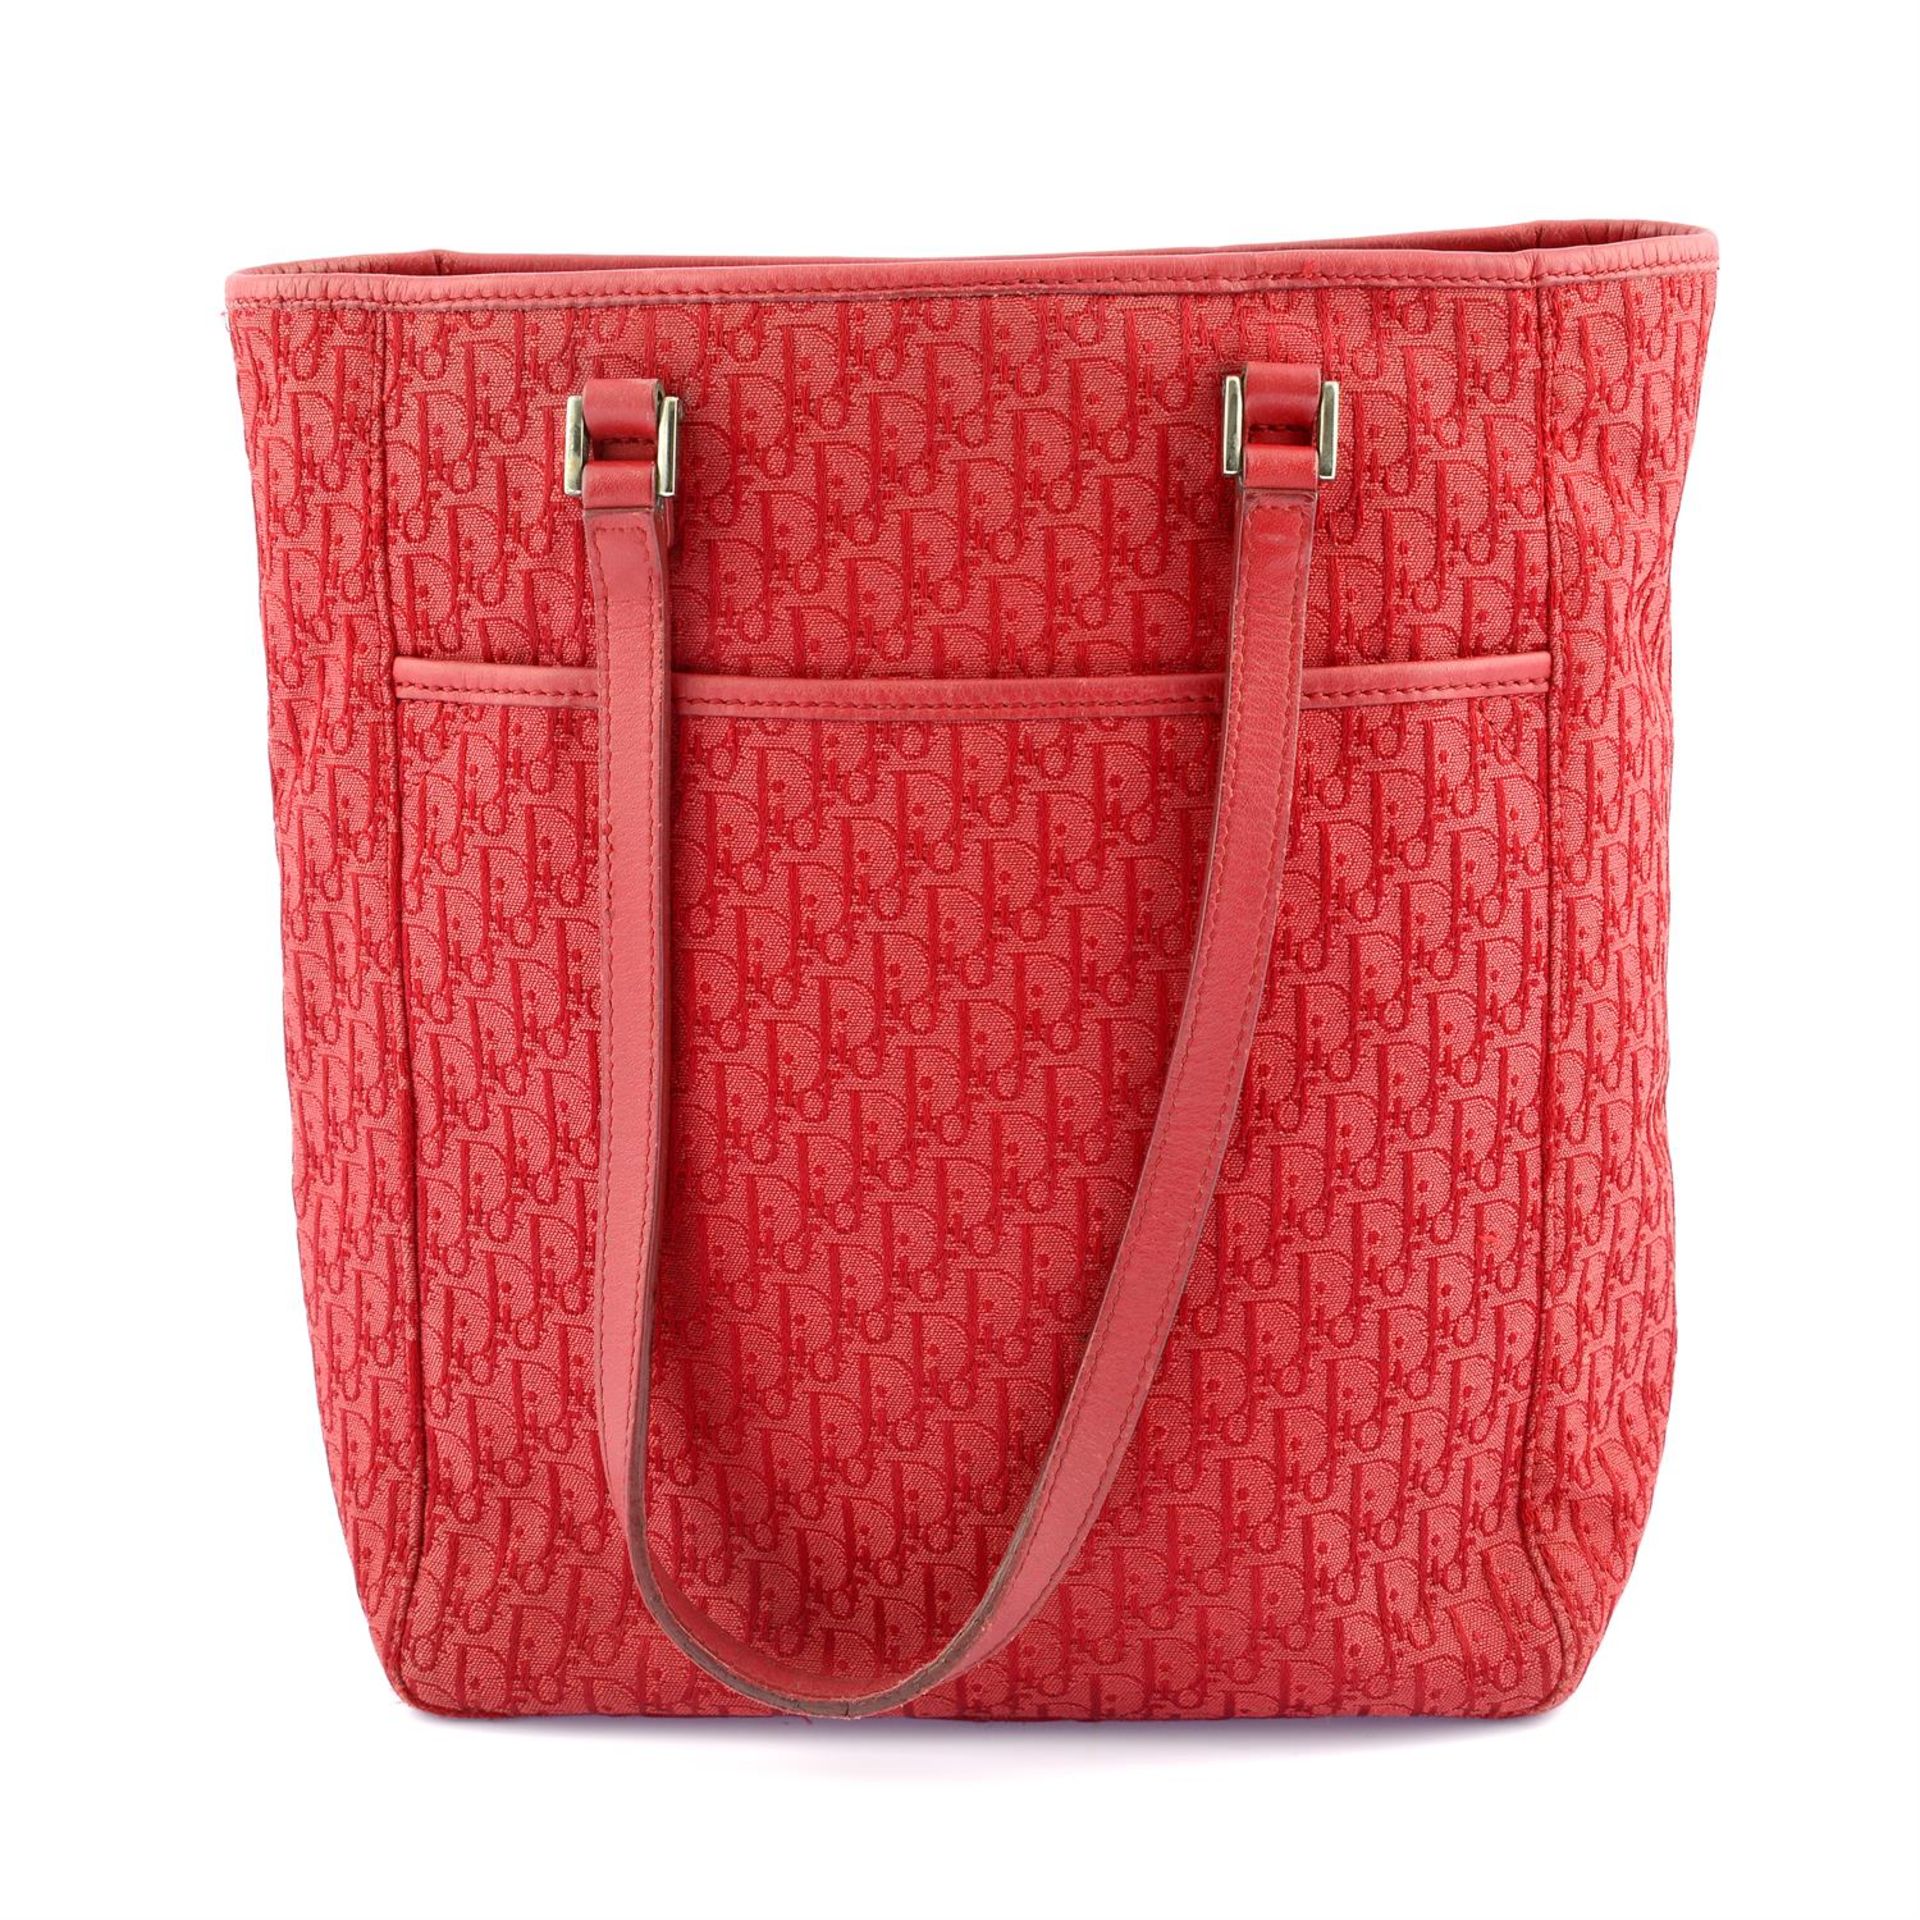 CHRISTIAN DIOR - a red canvas Trotter tote. - Image 2 of 5